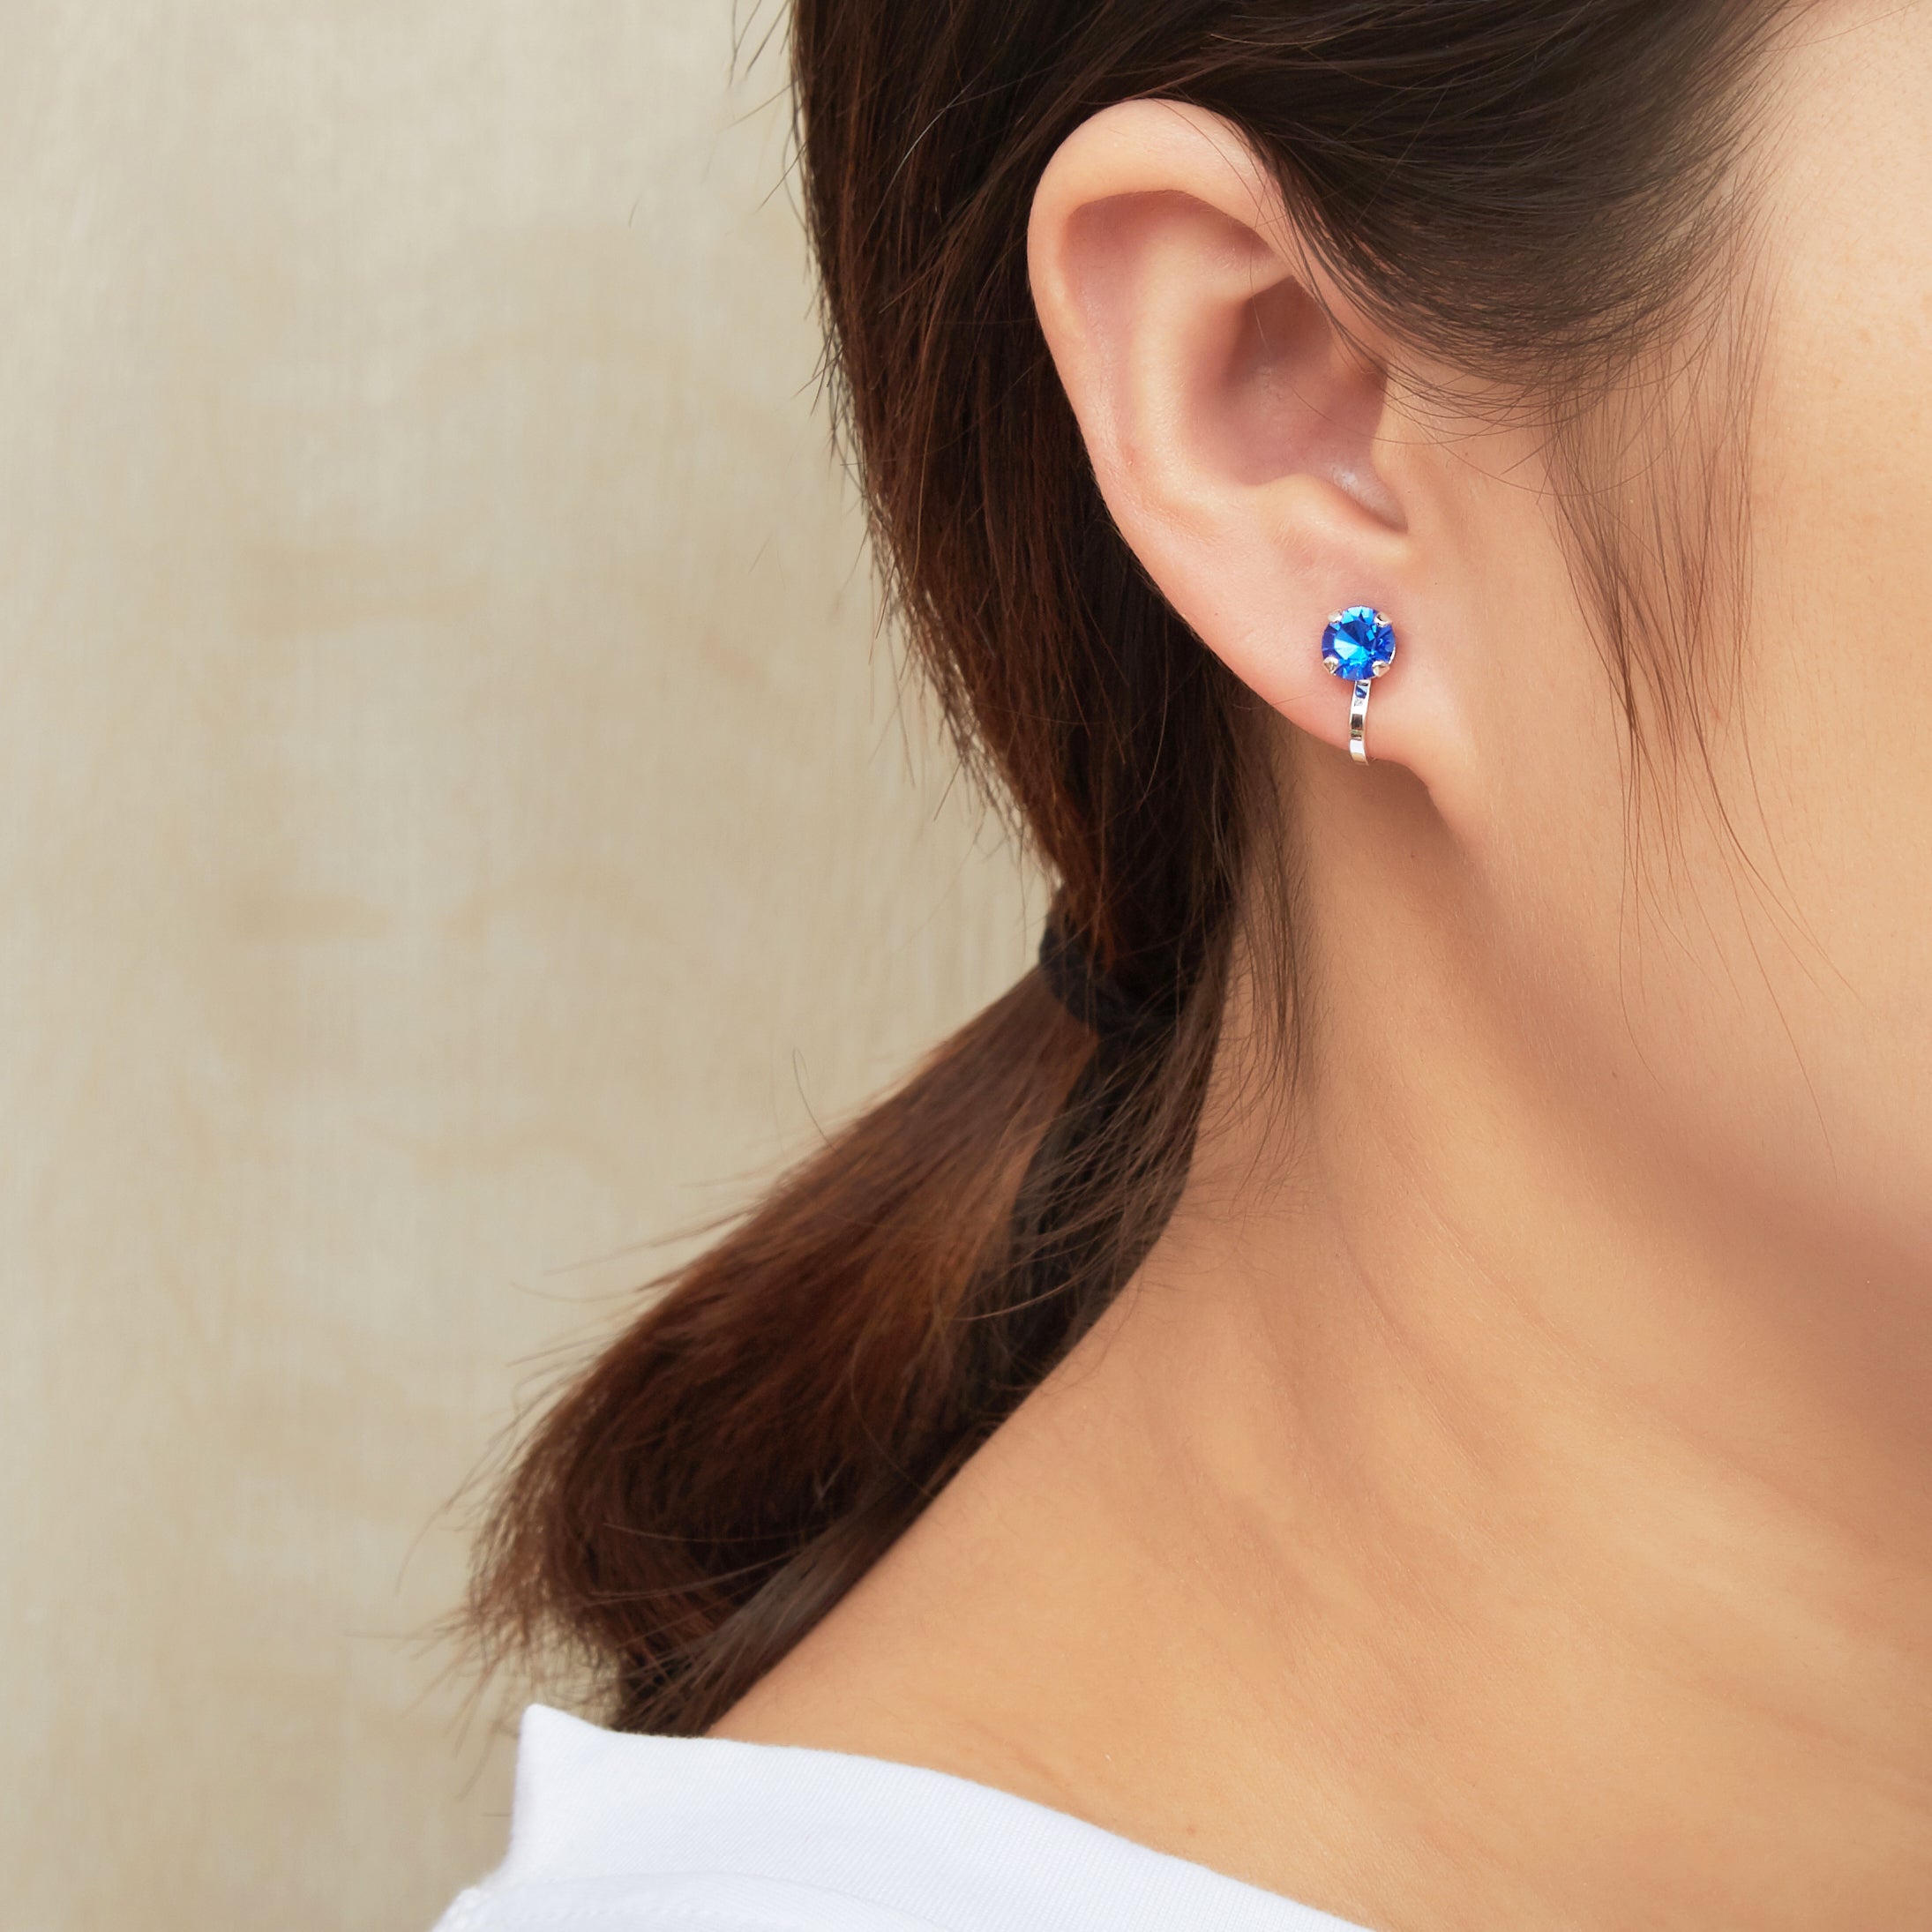 September (Sapphire) Birthstone Clip On Earrings Created with Zircondia® Crystals